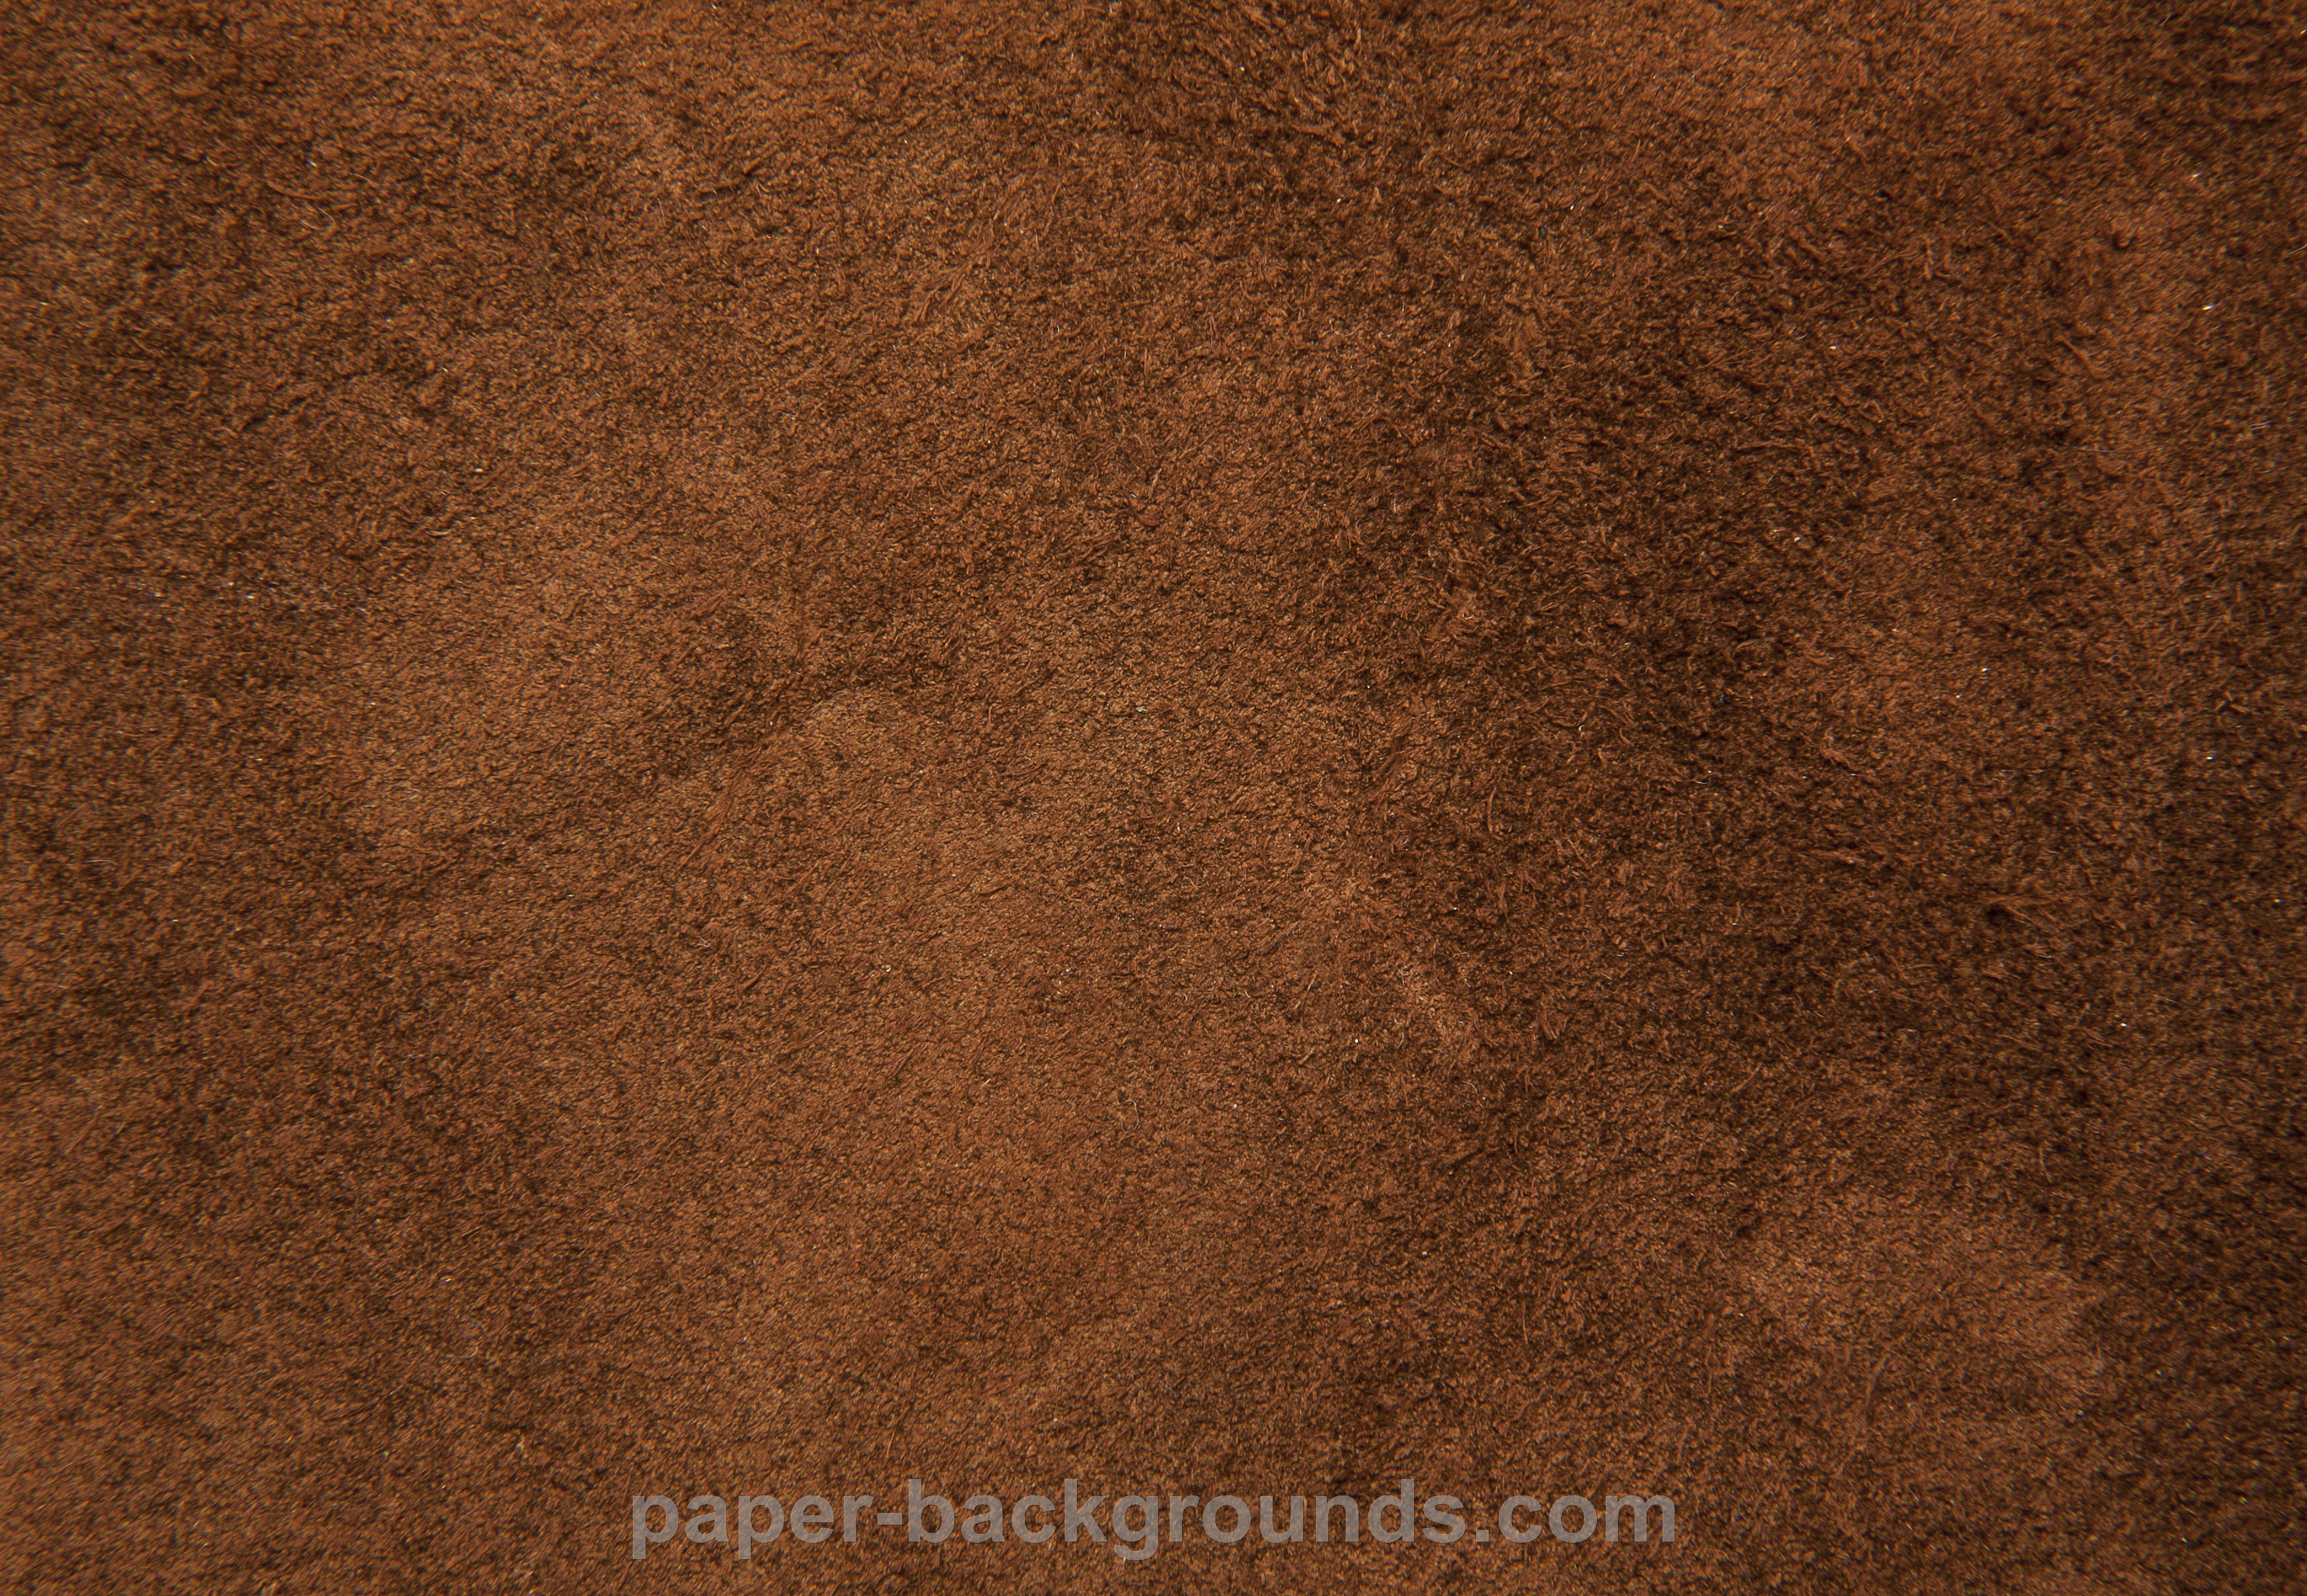 Brown Leather Background Texture Leather Background Texture